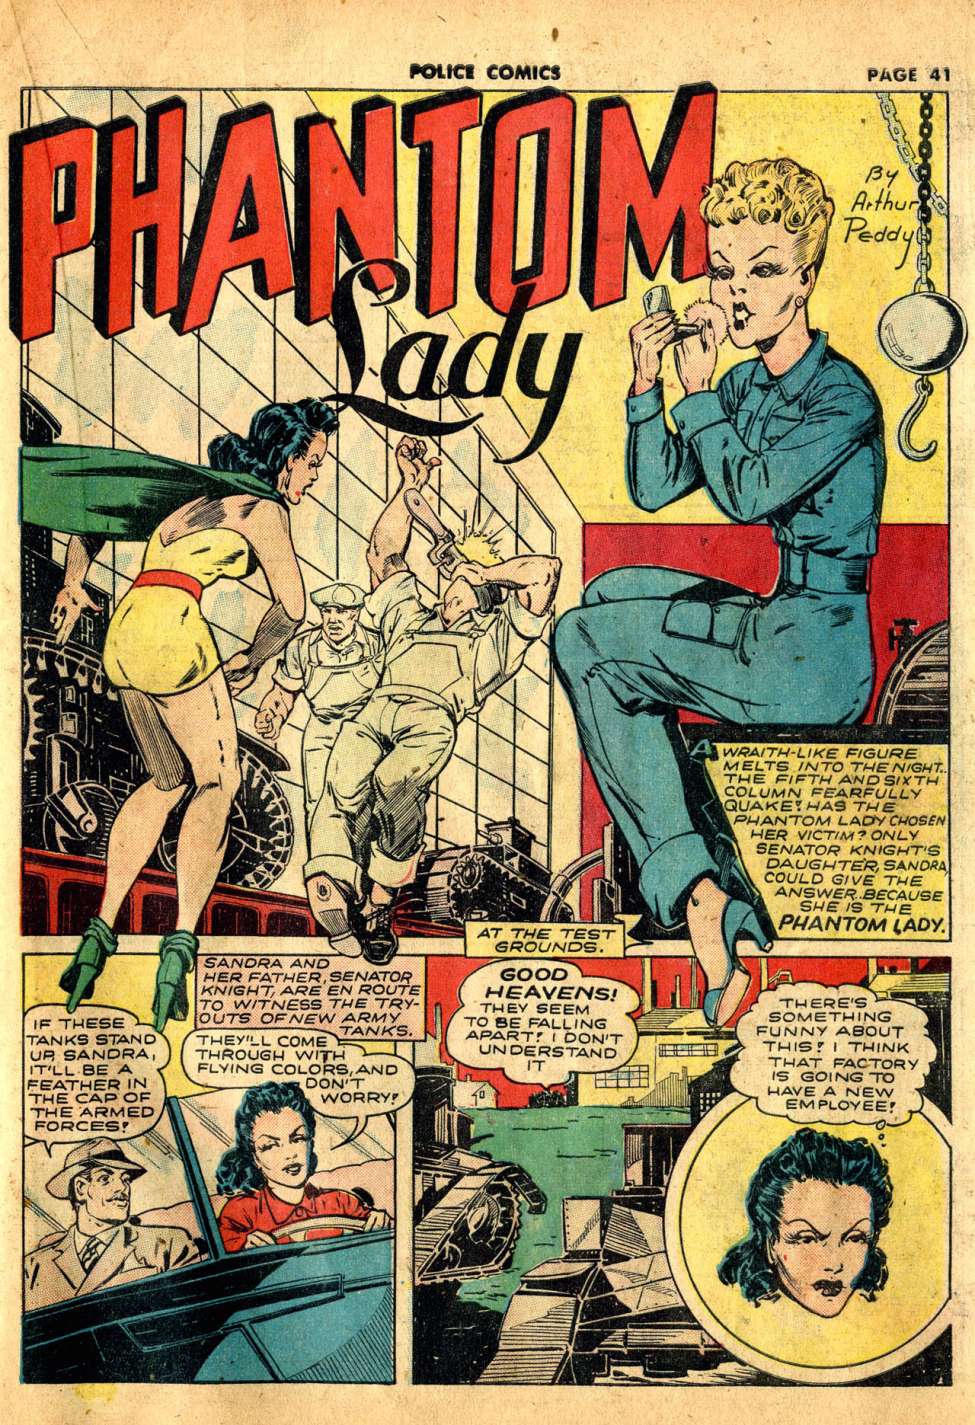 Comic Book Cover For Phantom Lady Archives v1.2 - The Quality Years